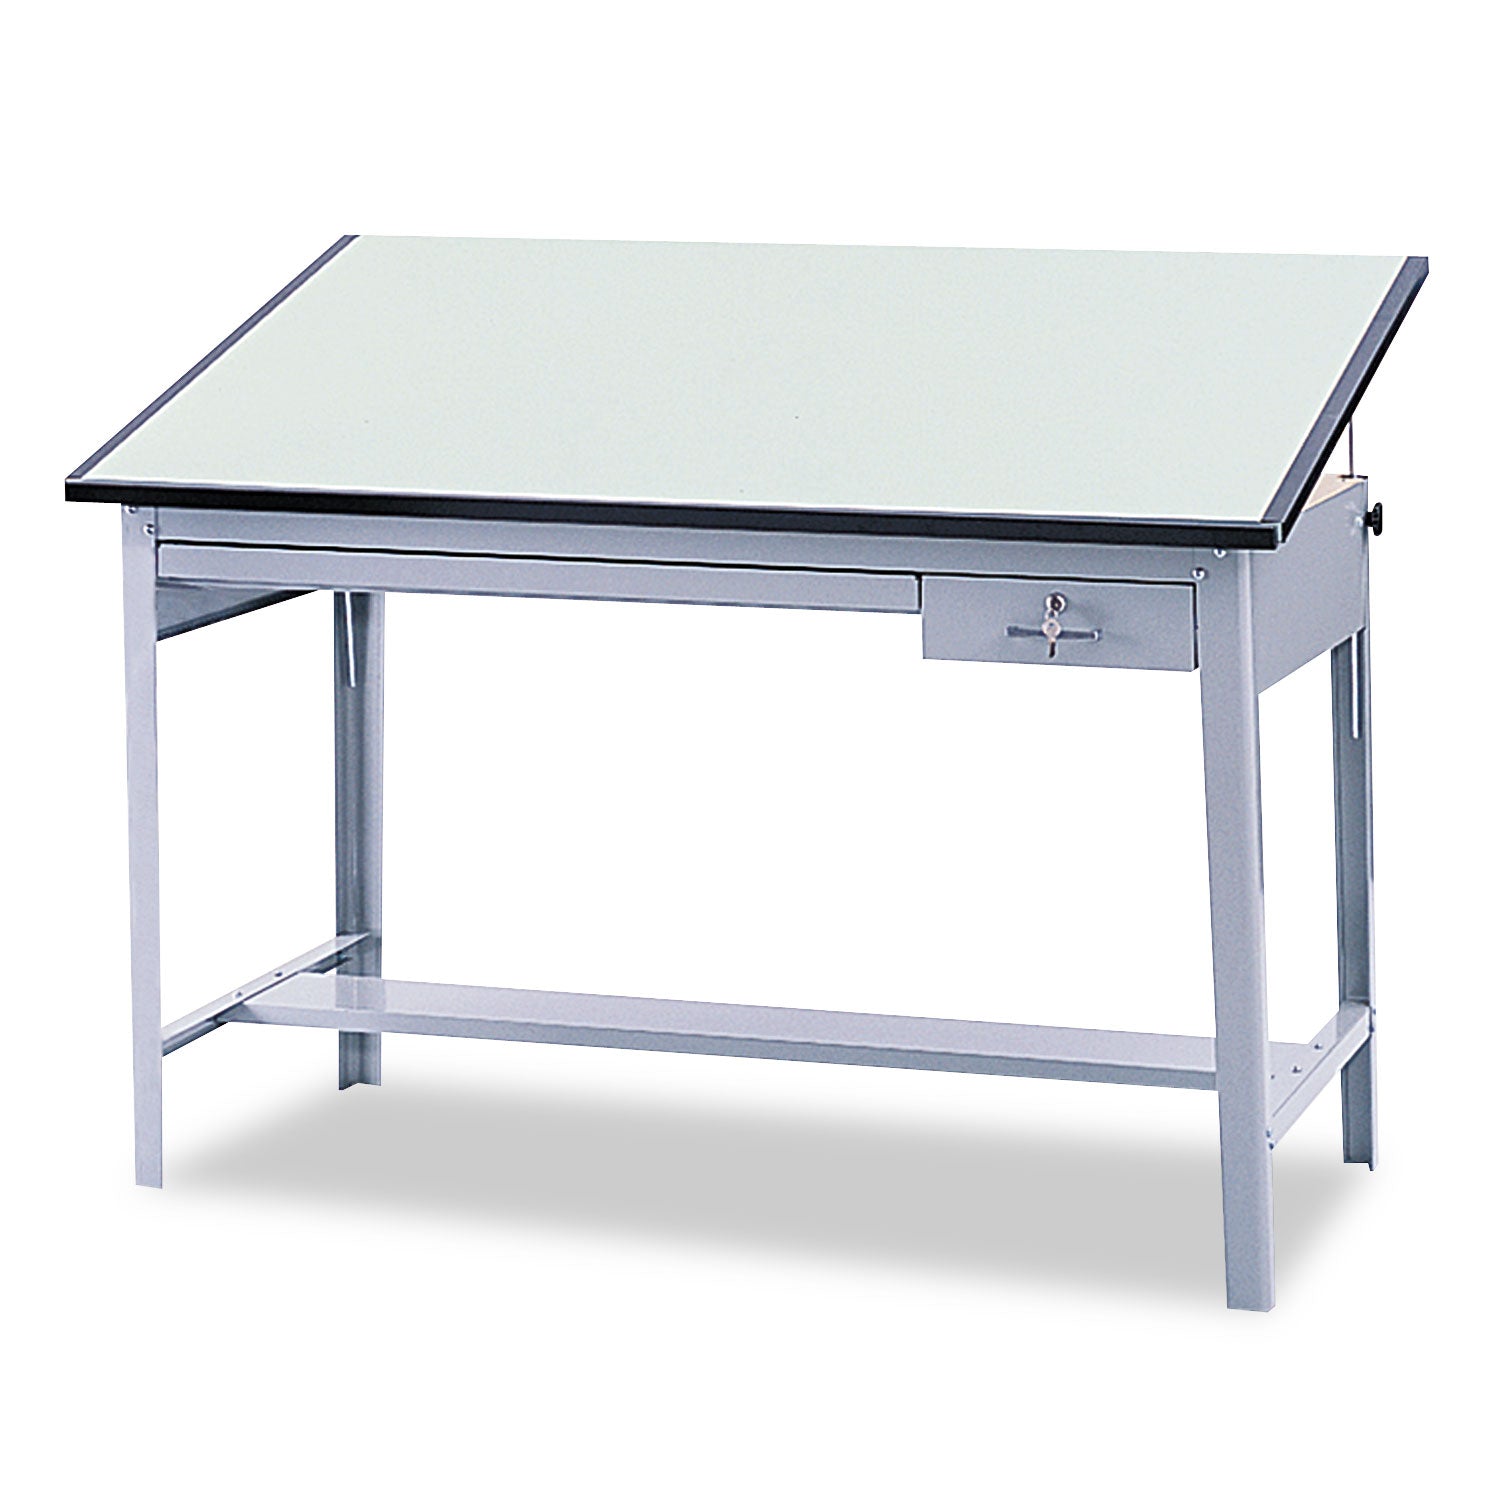 Precision Four-Post Drafting Table Base, 56.5w x 30.5d x 35.5h, Gray - 